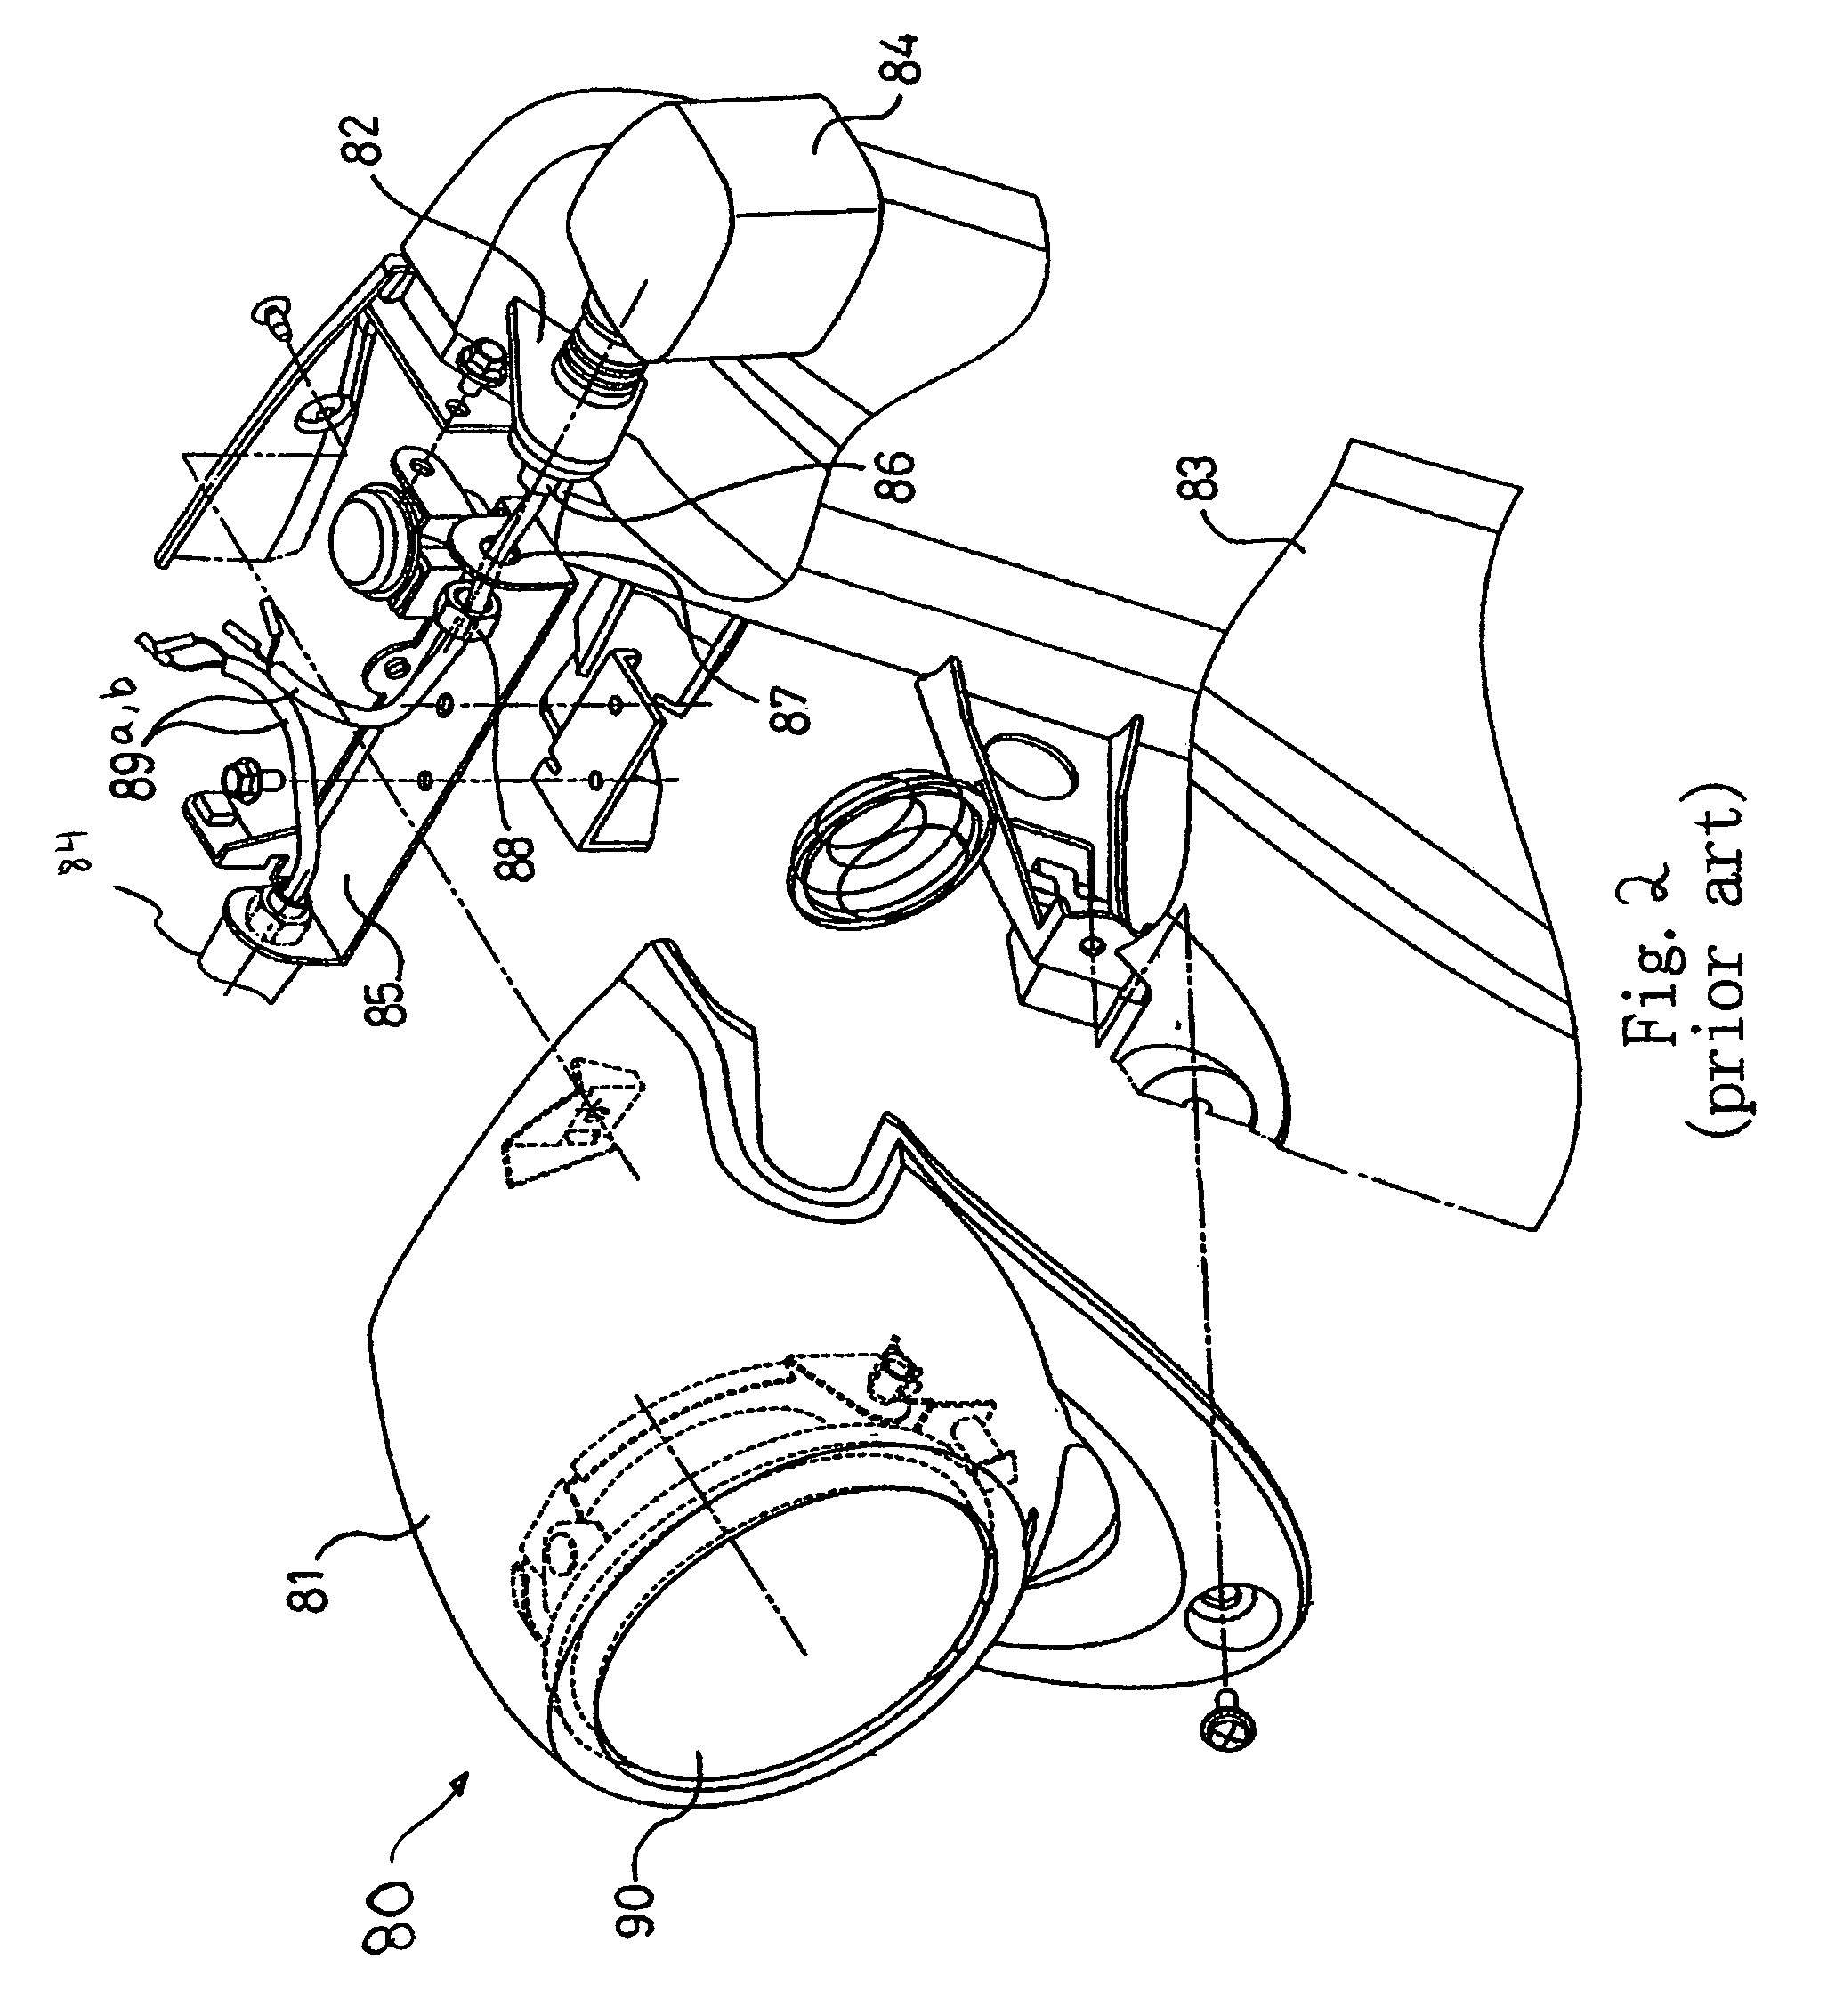 Headlight assembly structure for a motorcycle